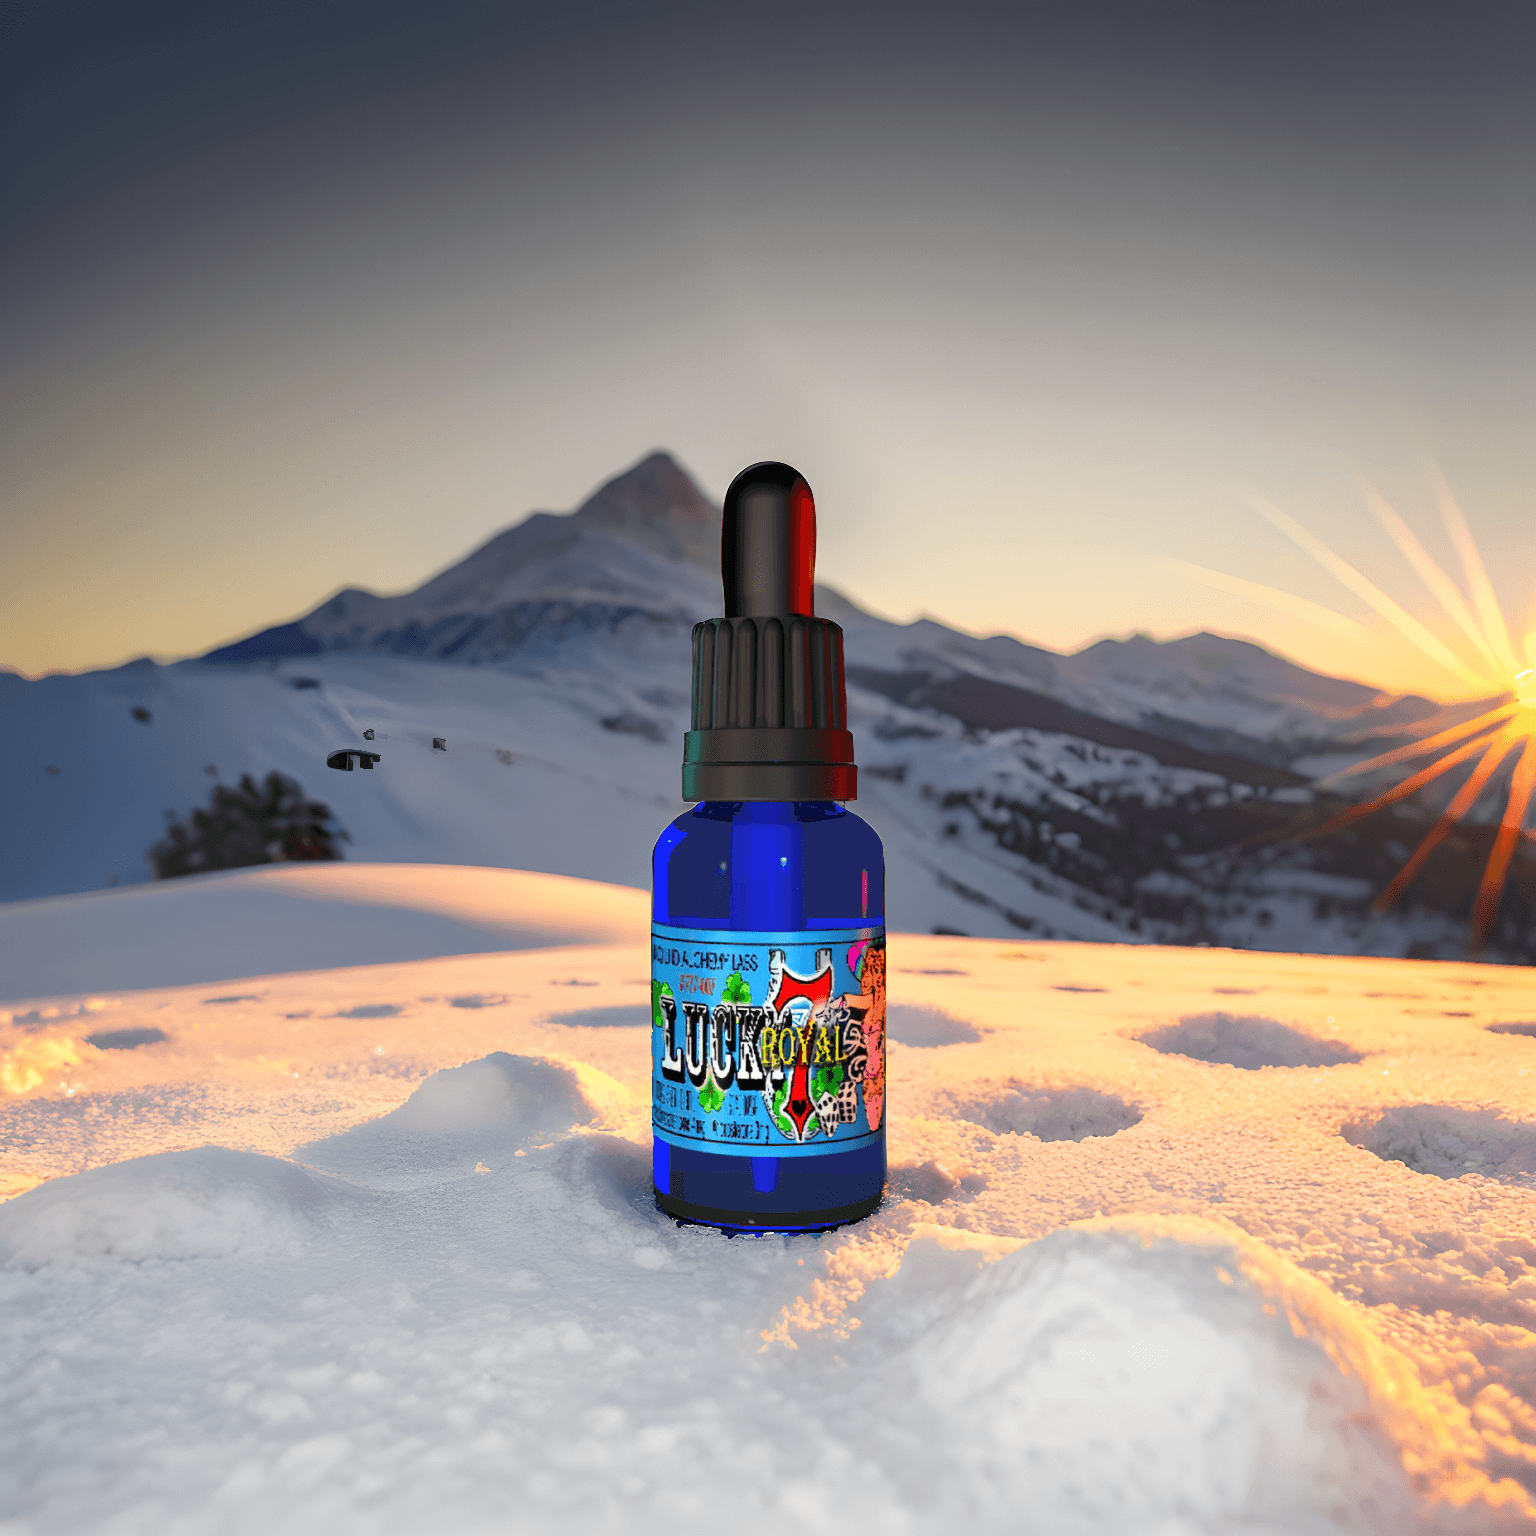 Blue bottle of LUCKY 7 ROYAL™ Pheromone Oil displayed on snowy mountain at sunrise, promoting Royal Pheromones' strength and reliability Pheromone Colognes.